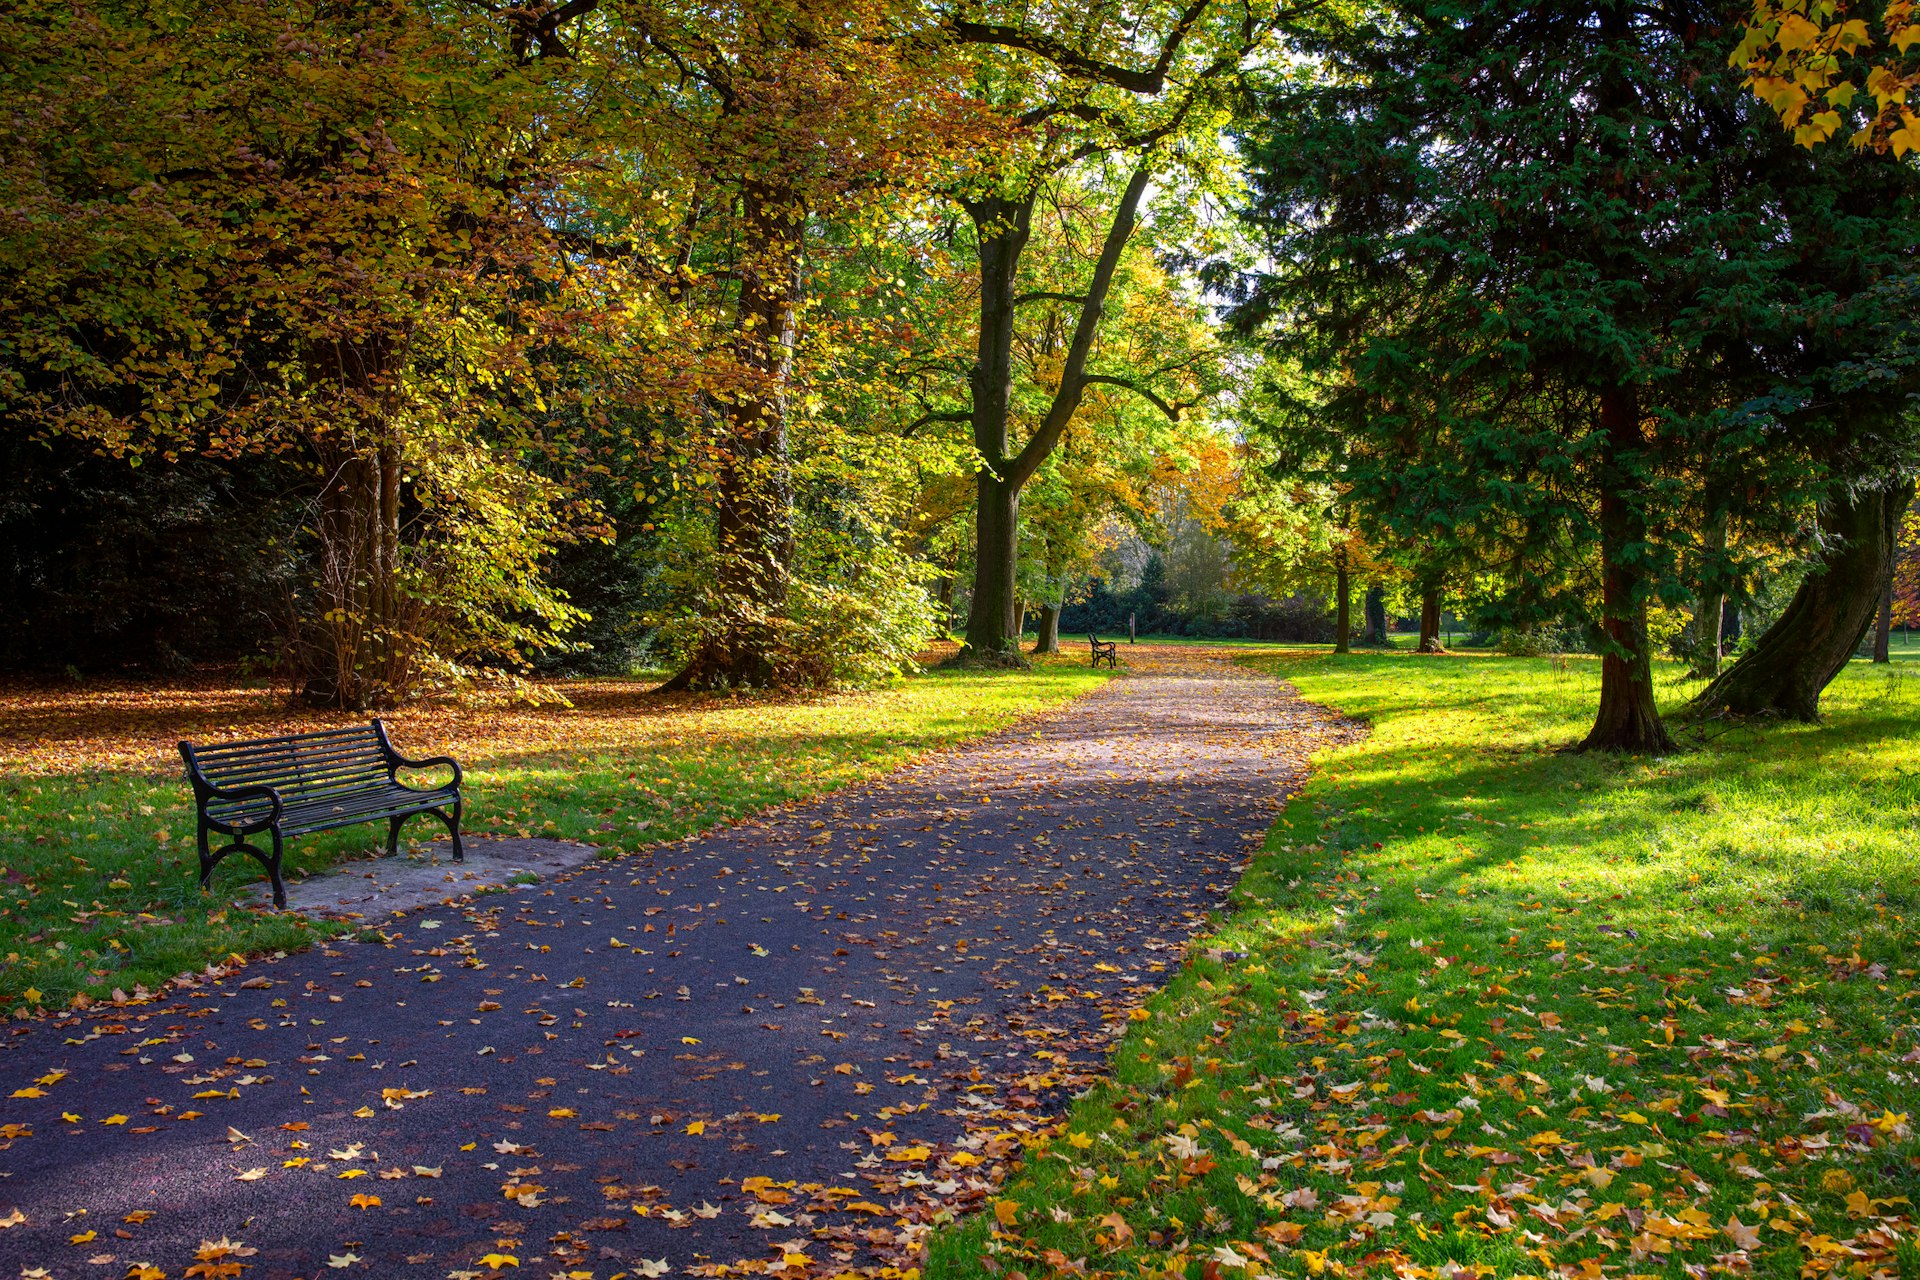 An empty bench at Ormeau Park, Belfast at the end of summer. There is green grass and trees either side just starting to turn with a scattering of yellow and red leaves on the floor.